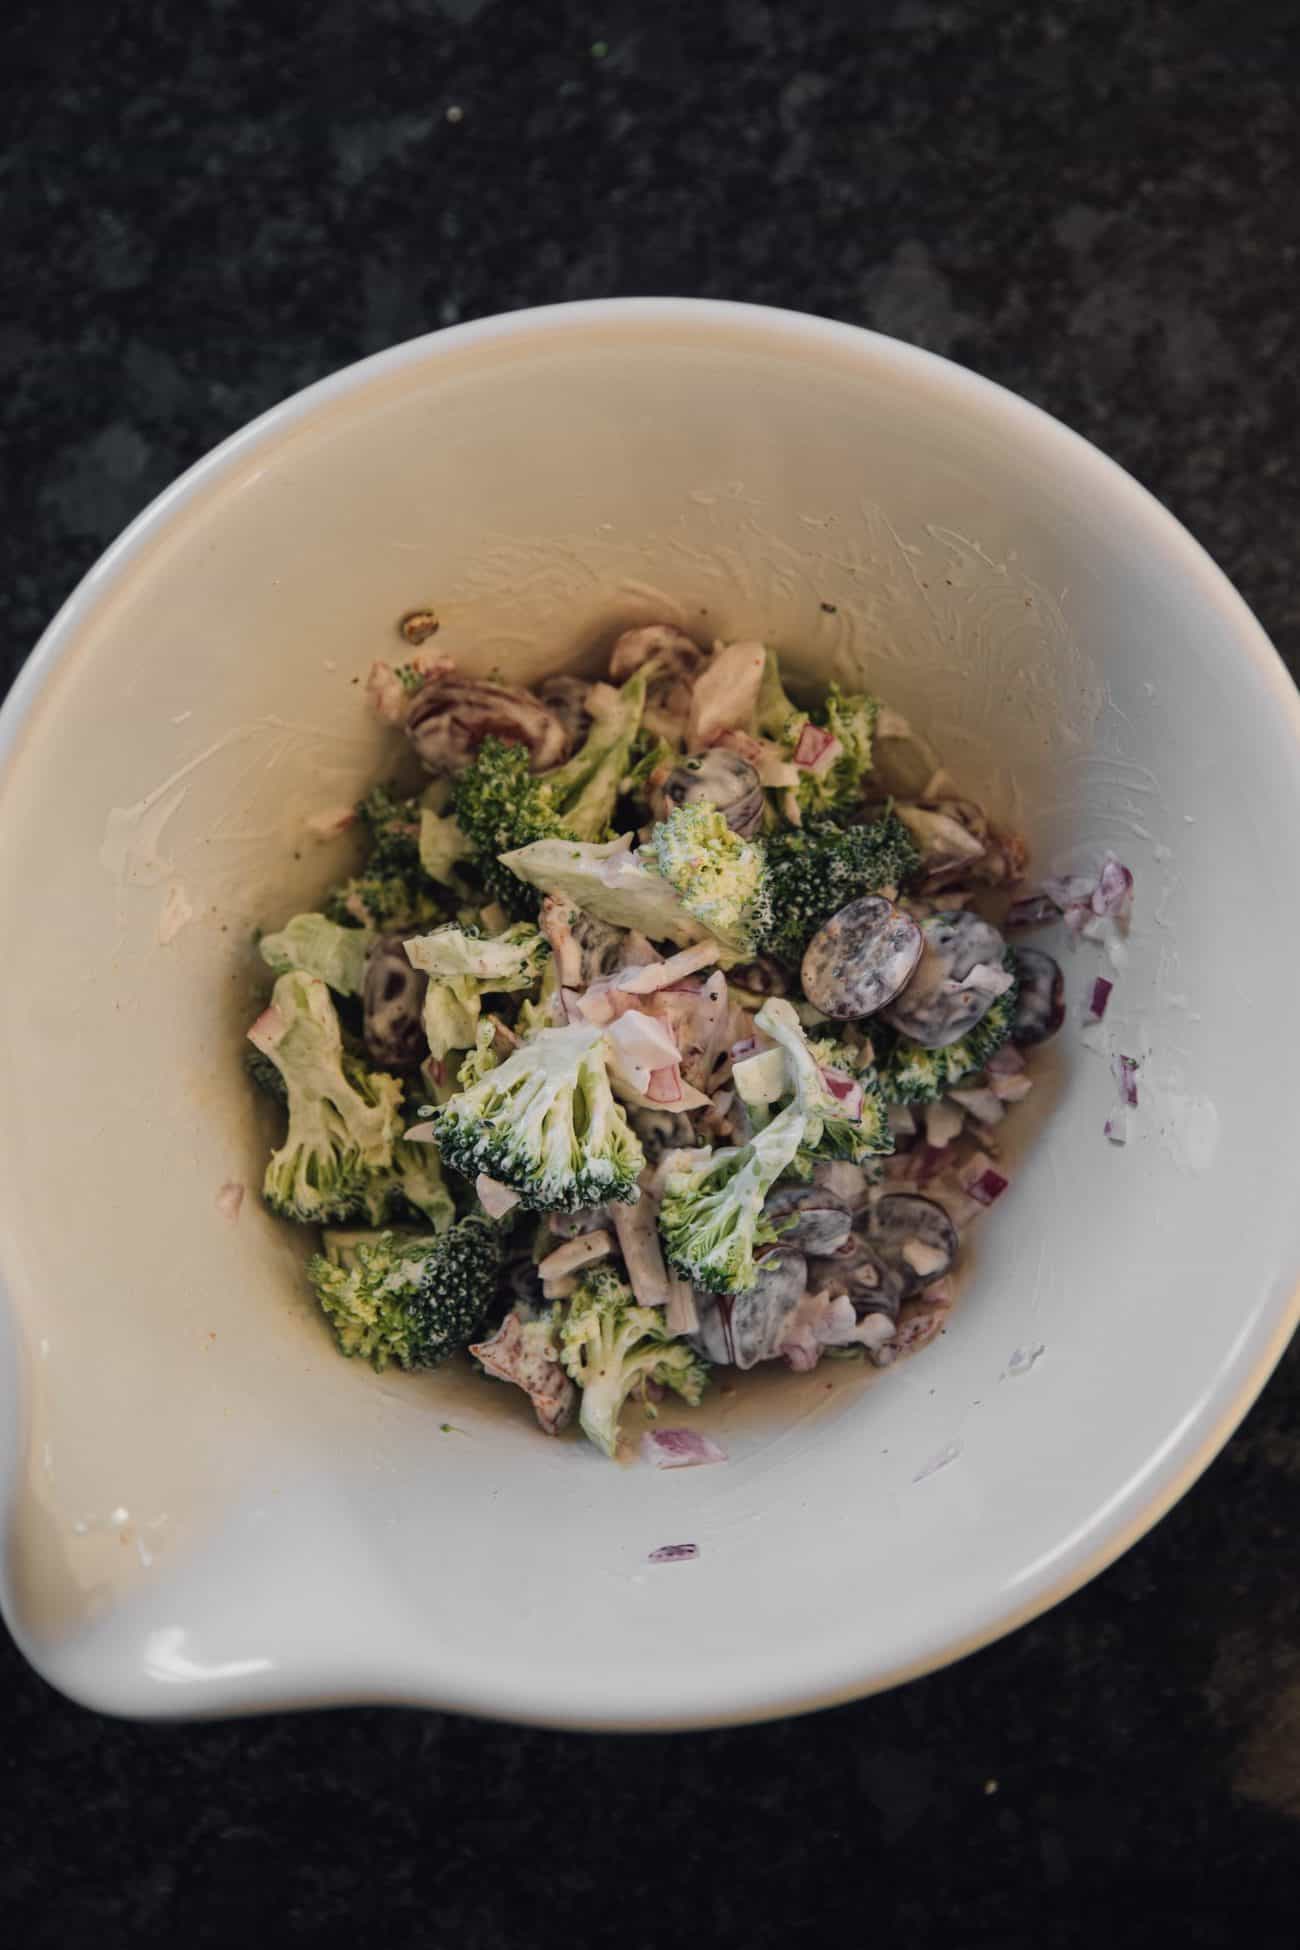 Broccoli Salad With Red Grapes, Bacon and Sunflower Seeds